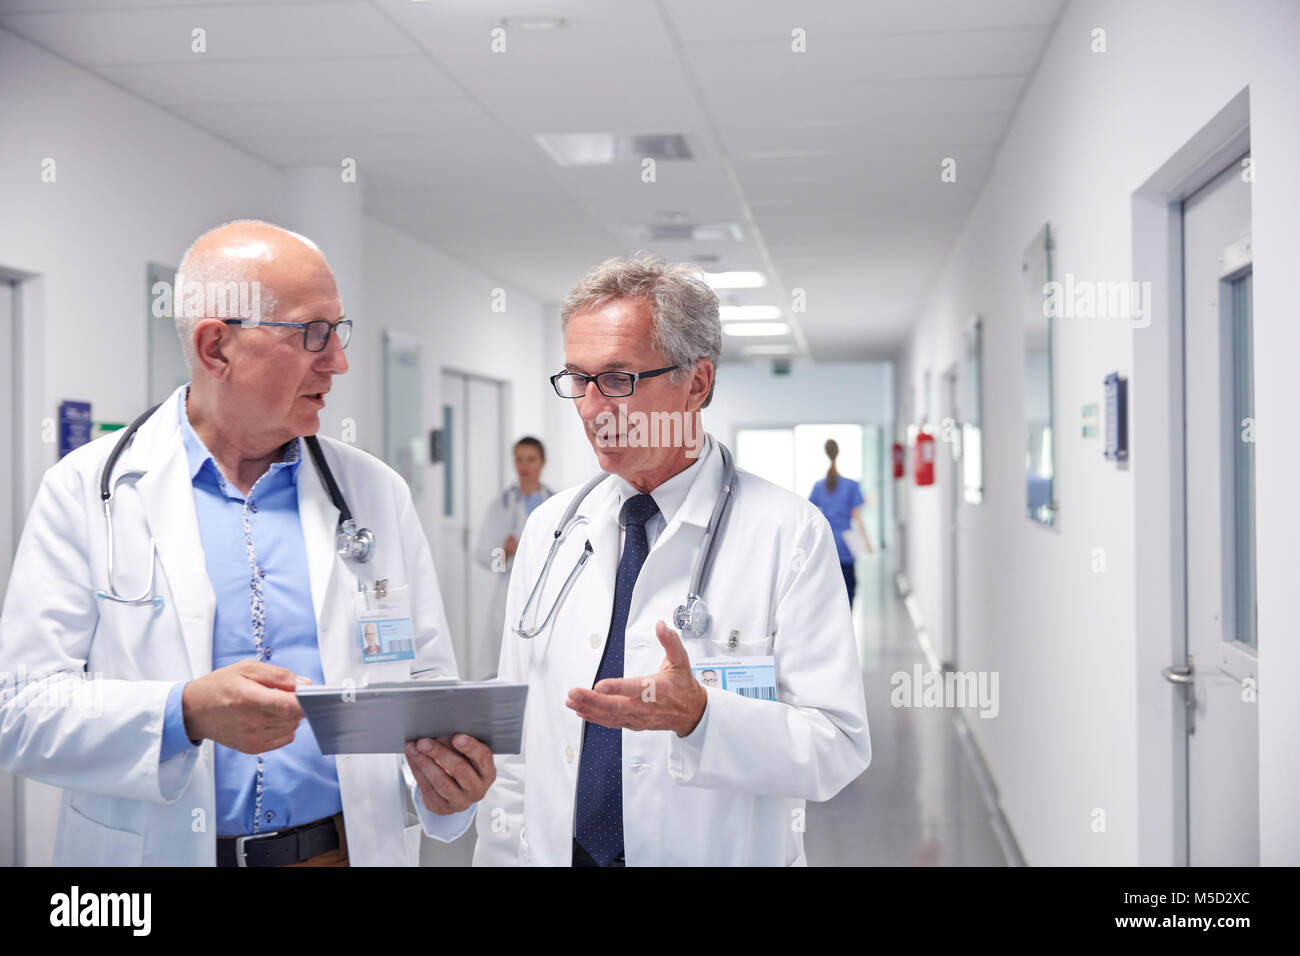 Male doctors with clipboard making rounds, talking in hospital corridor Stock Photo